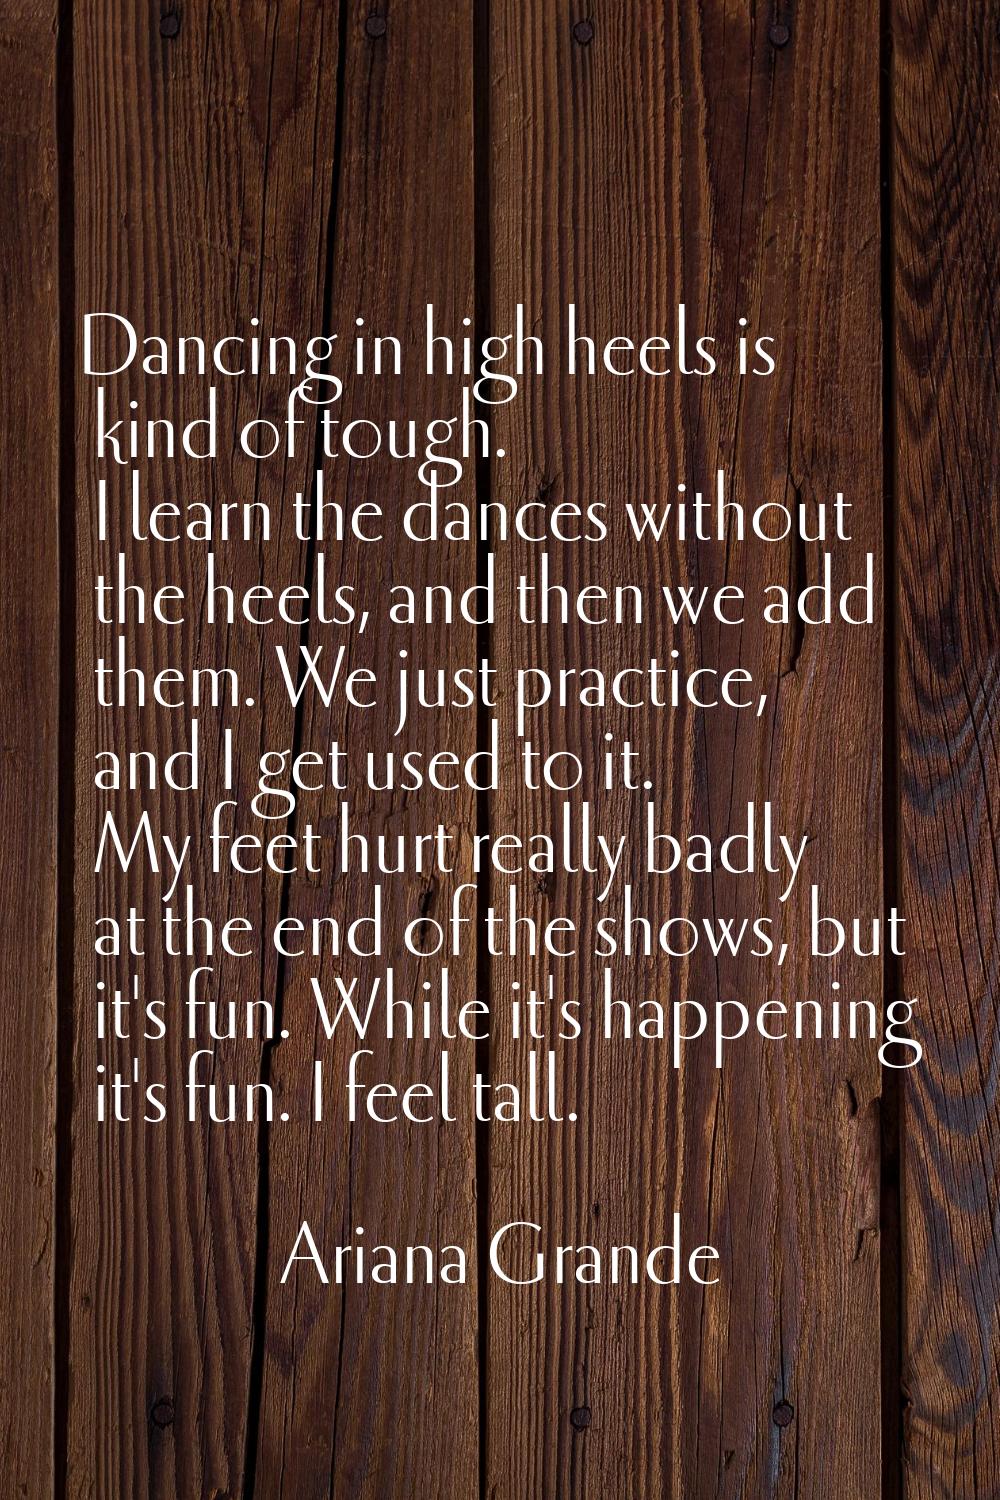 Dancing in high heels is kind of tough. I learn the dances without the heels, and then we add them.